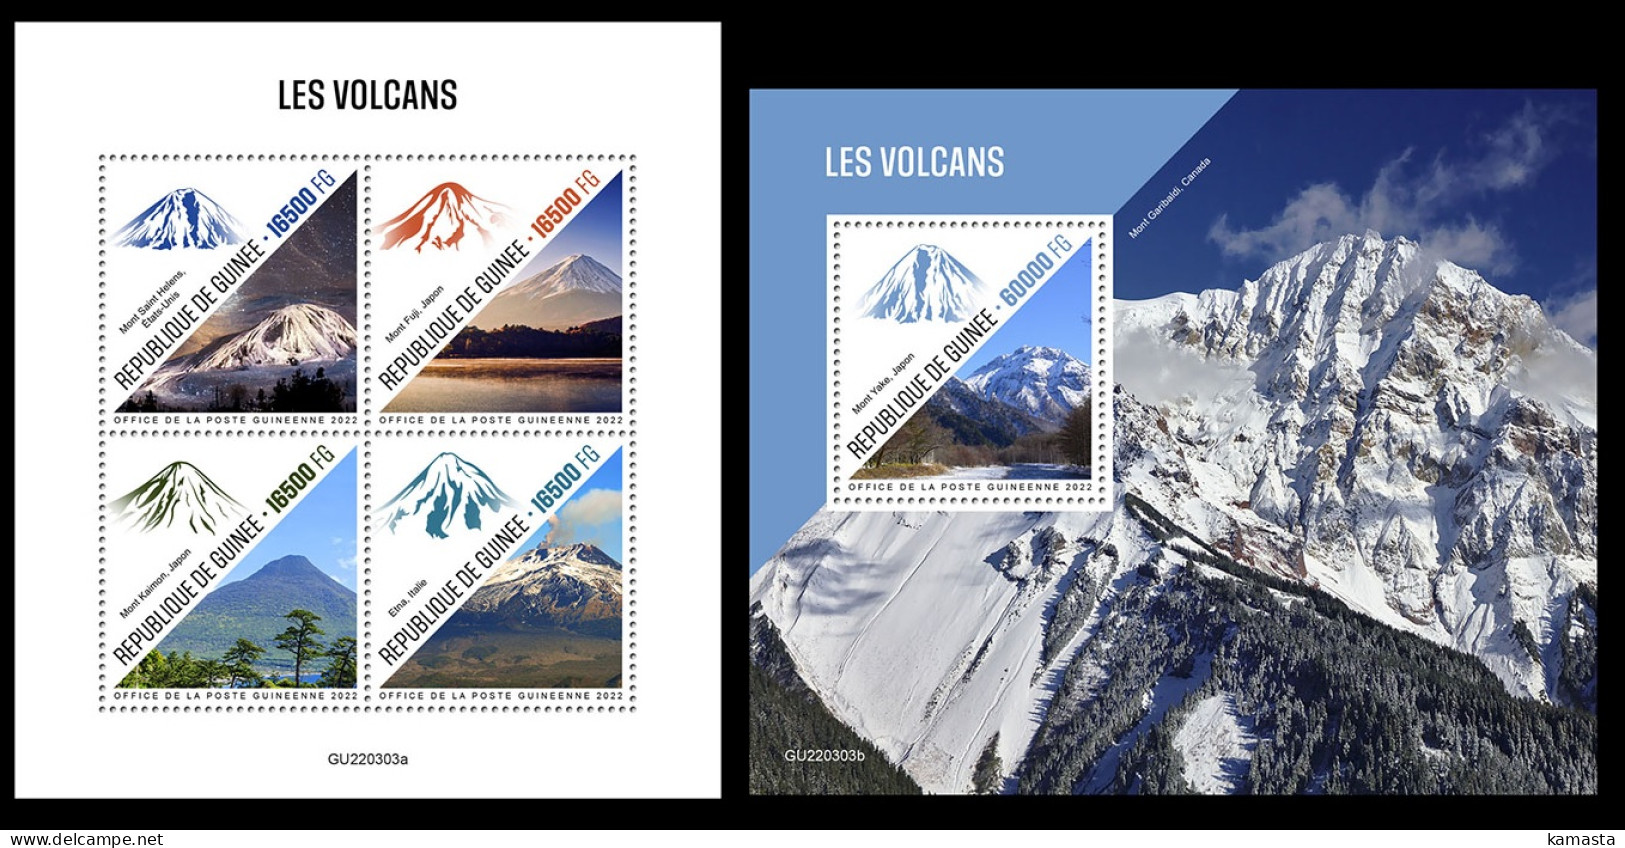 Guinea  2022 Volcanoes. (303) OFFICIAL ISSUE - Volcanos